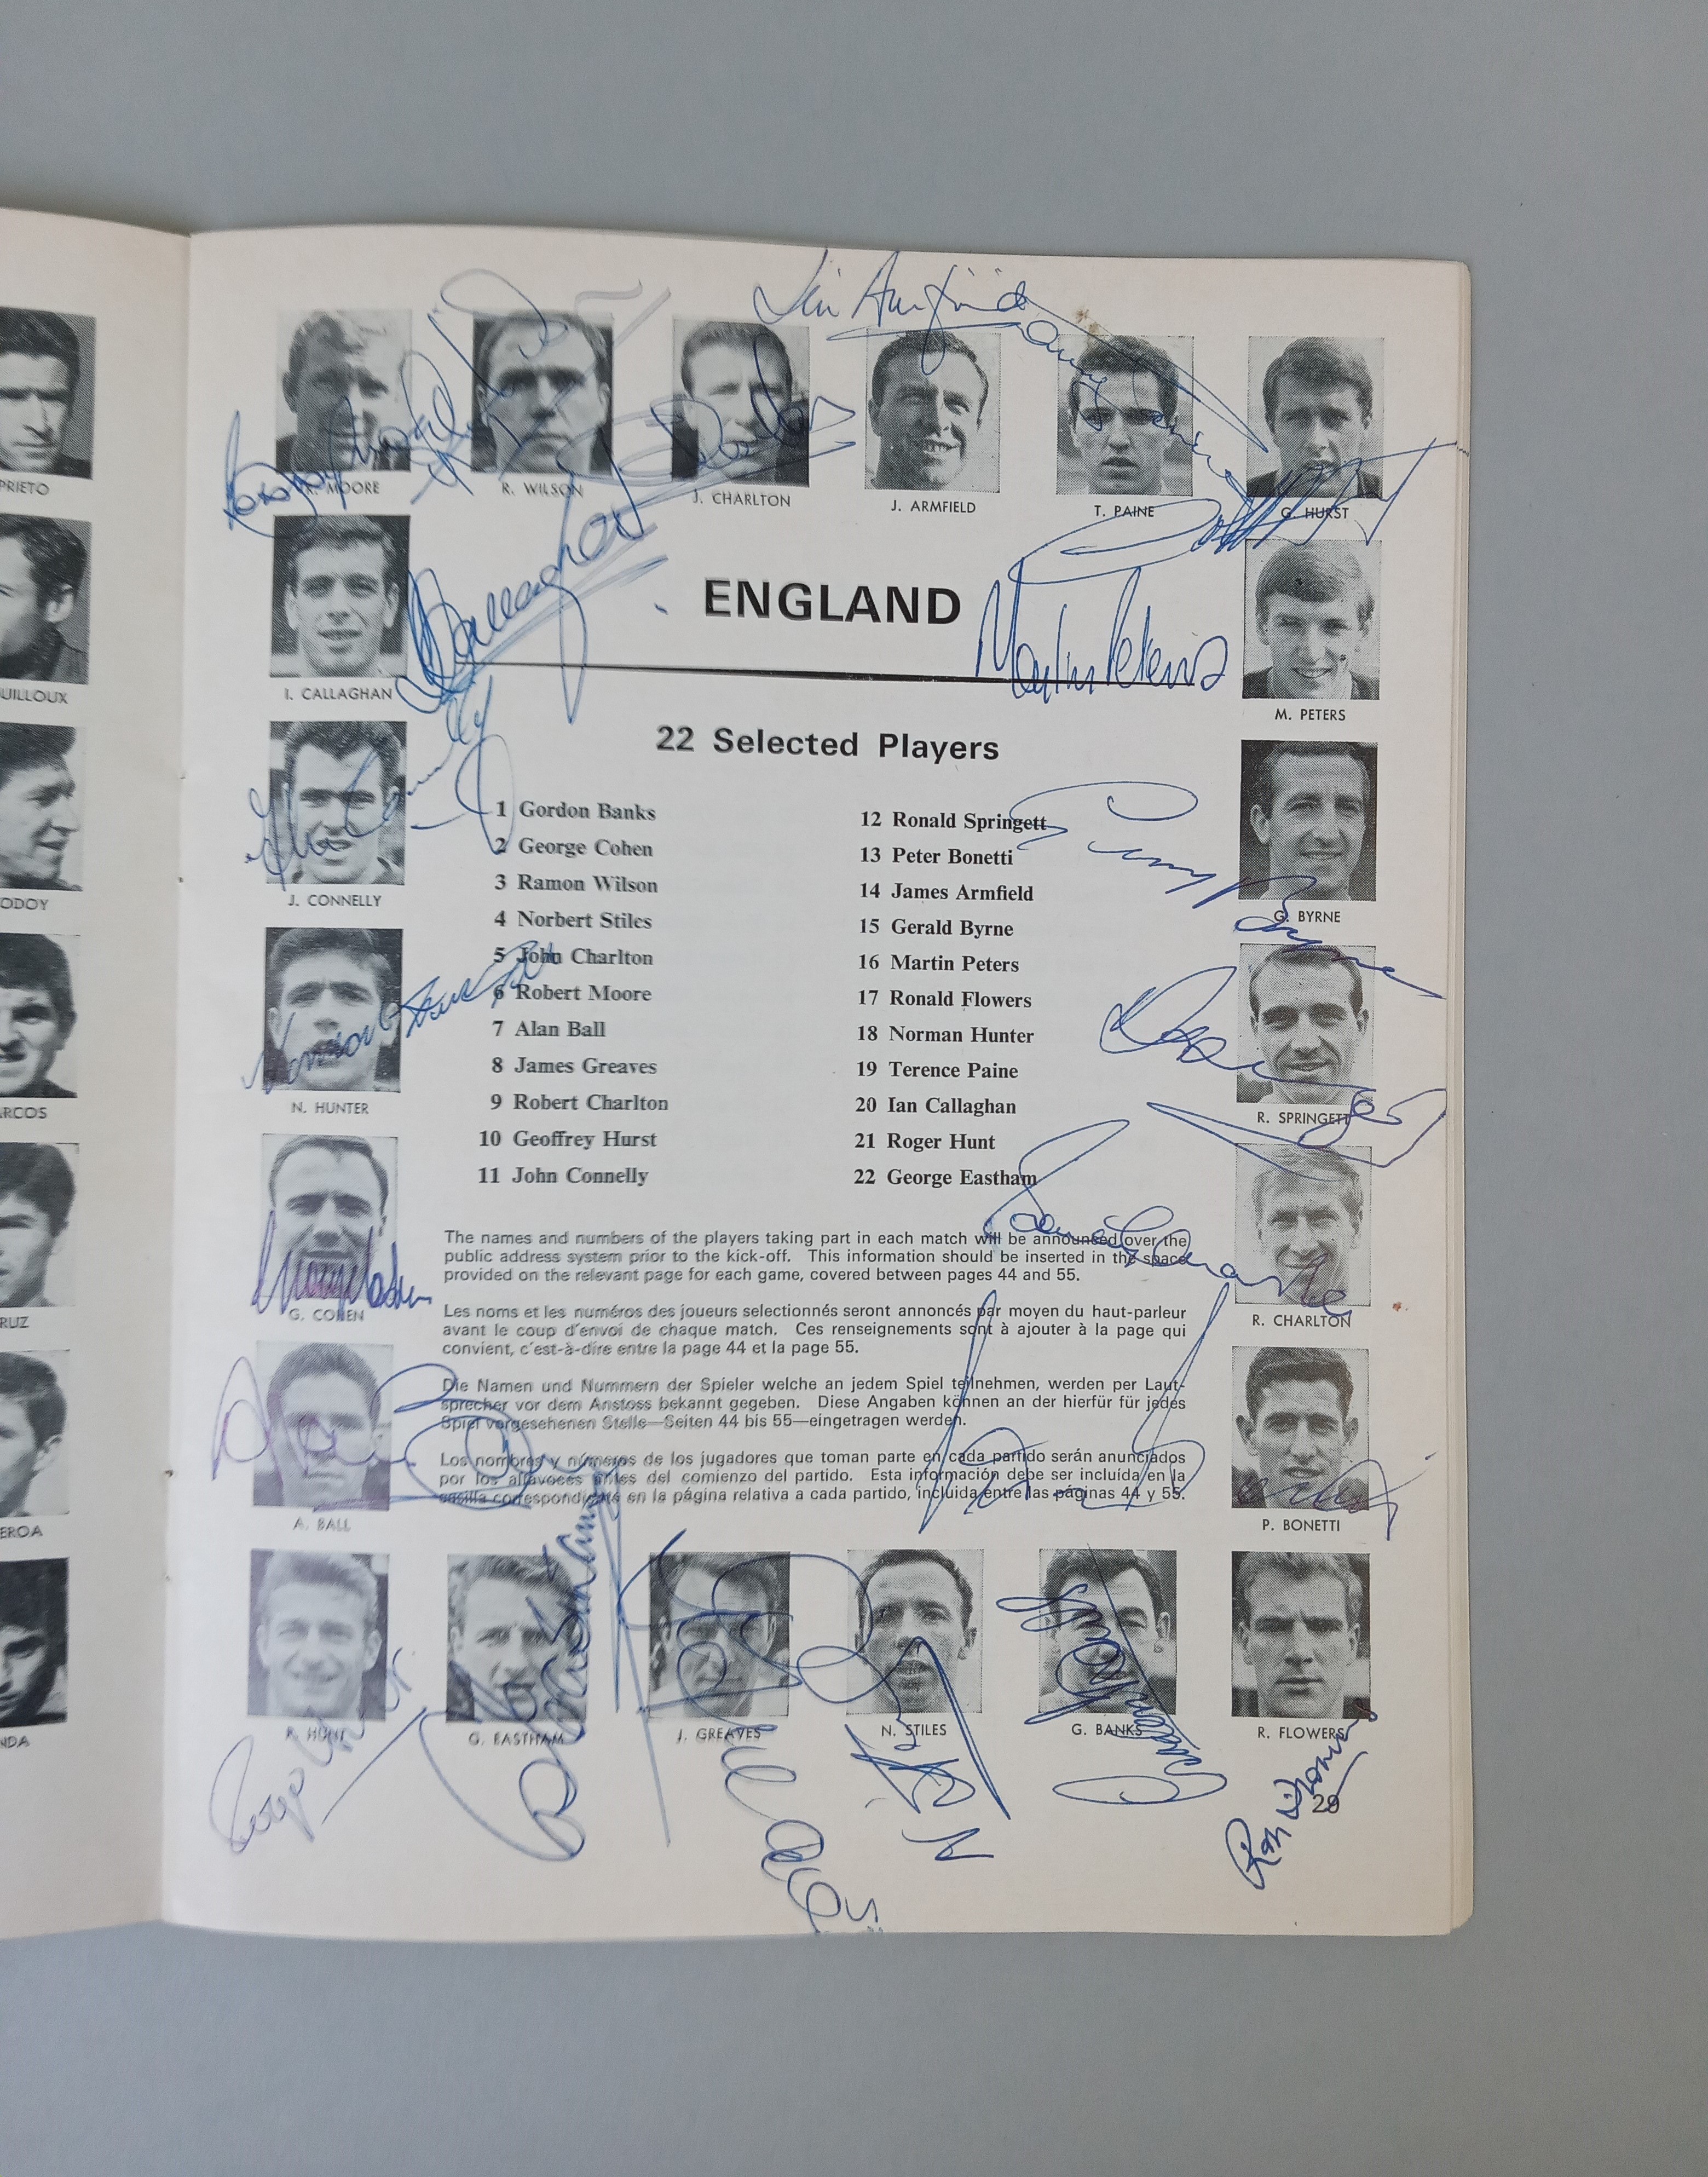 World Cup England 1966 tournament brochure signed to England page by full squad of 22 players, - Image 2 of 2